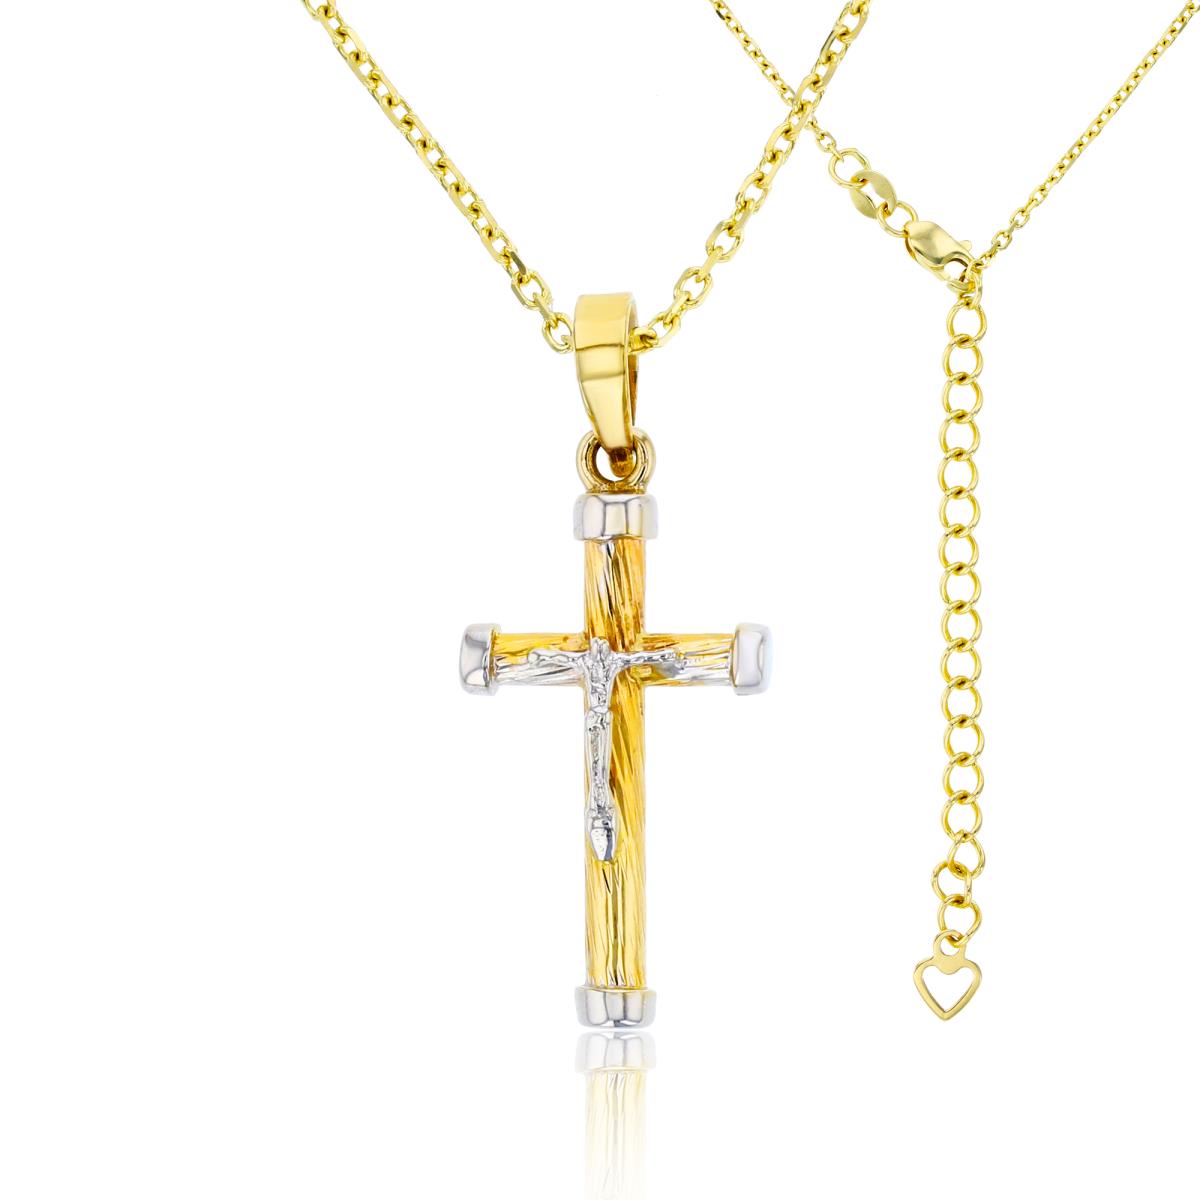 14K Two-Tone Gold 28x11mm Polished & Textured Crucifix Cross 17"+2" Necklace